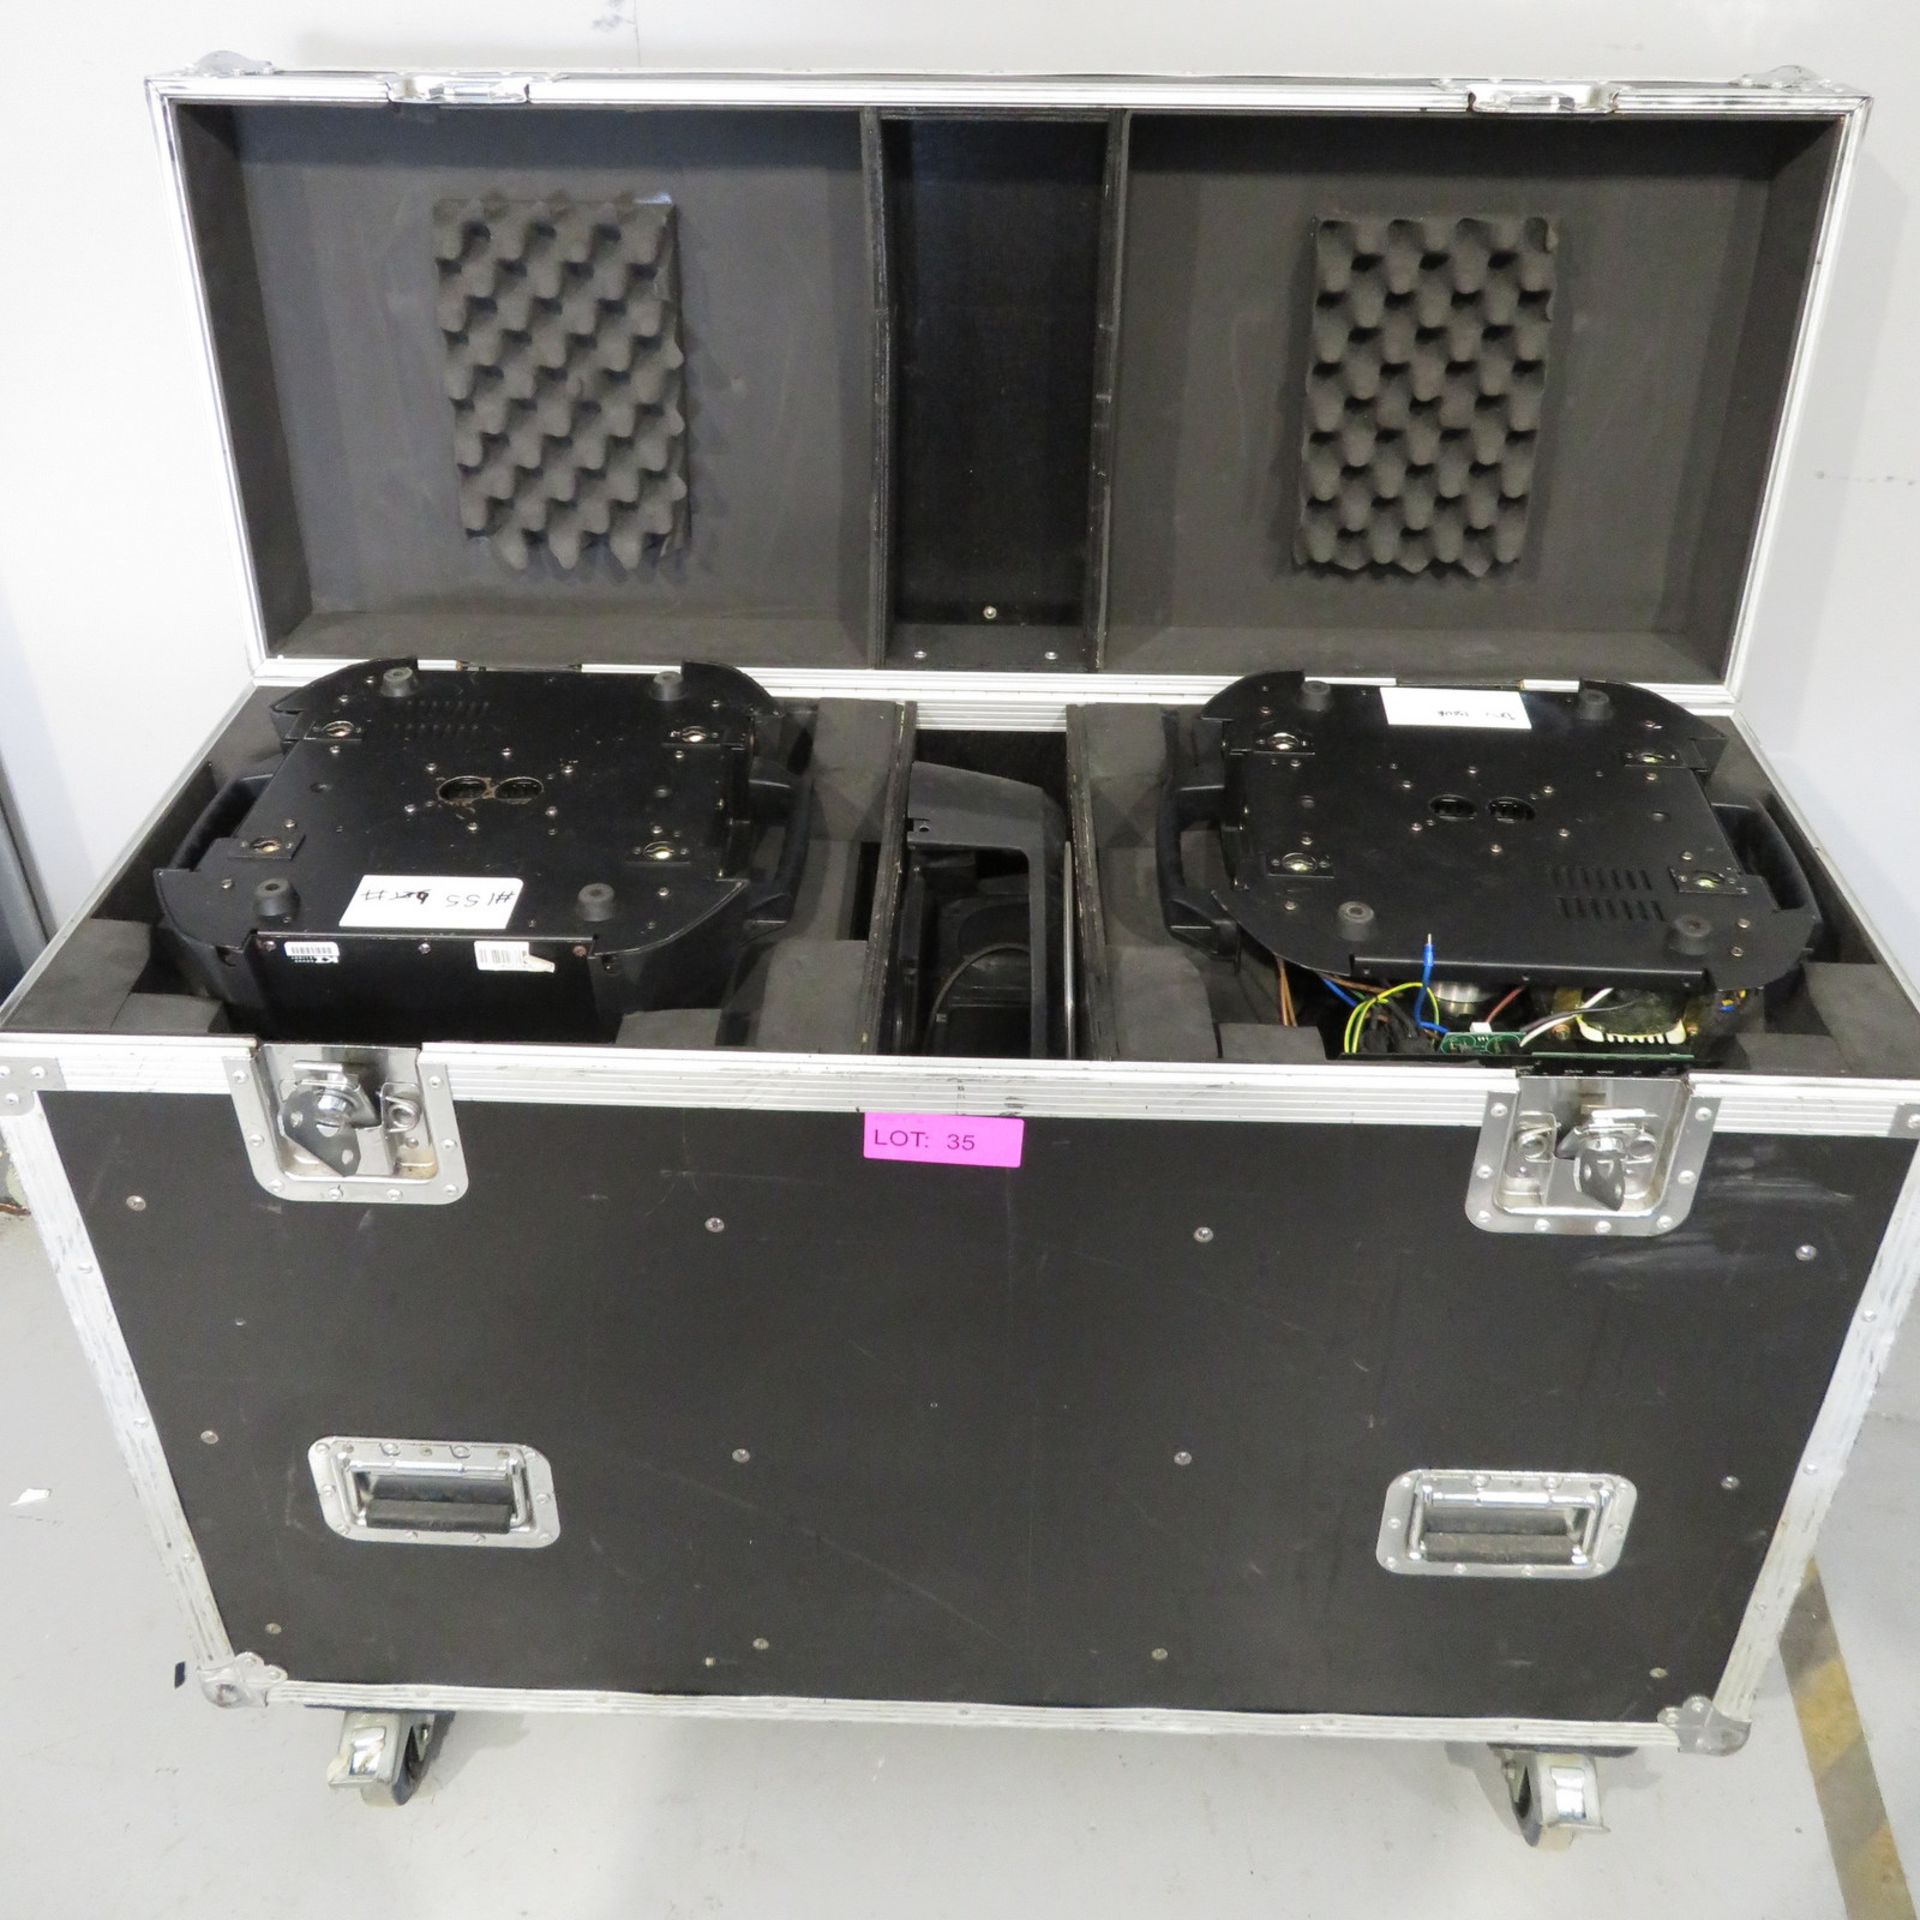 Pair of Showtec Phantom 300 Beams in flightcase. Includes hanging clamps and safety bonds. - Image 9 of 10